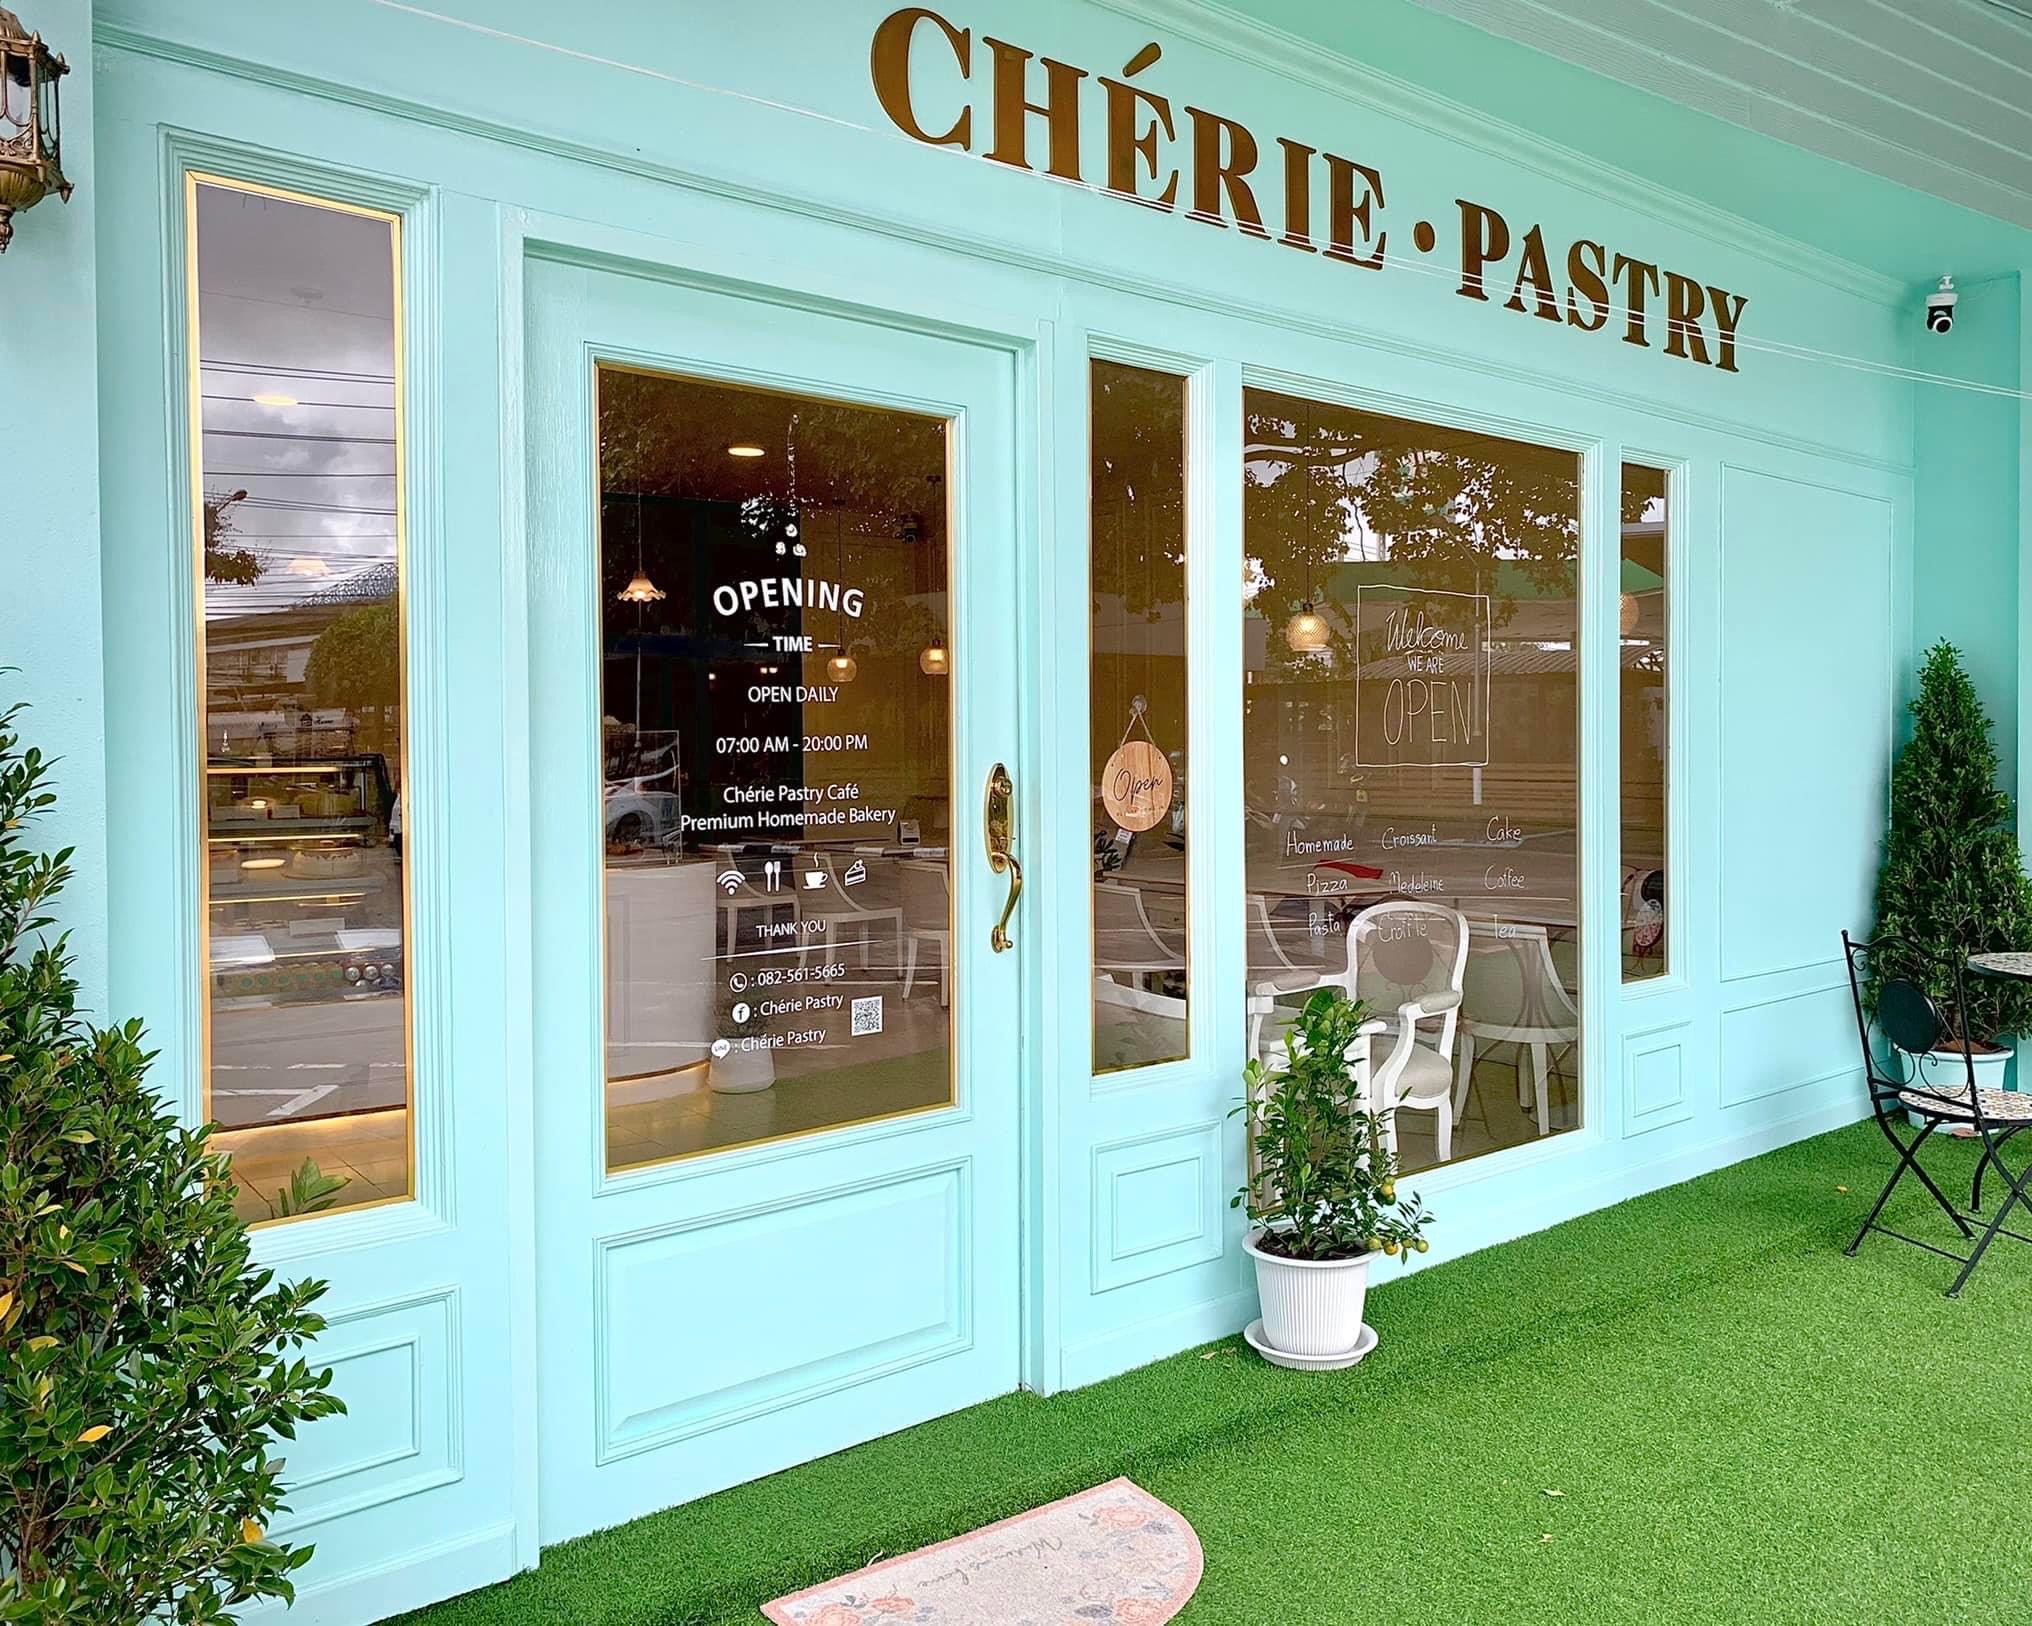 Chérie Pastry in Chiang Mai